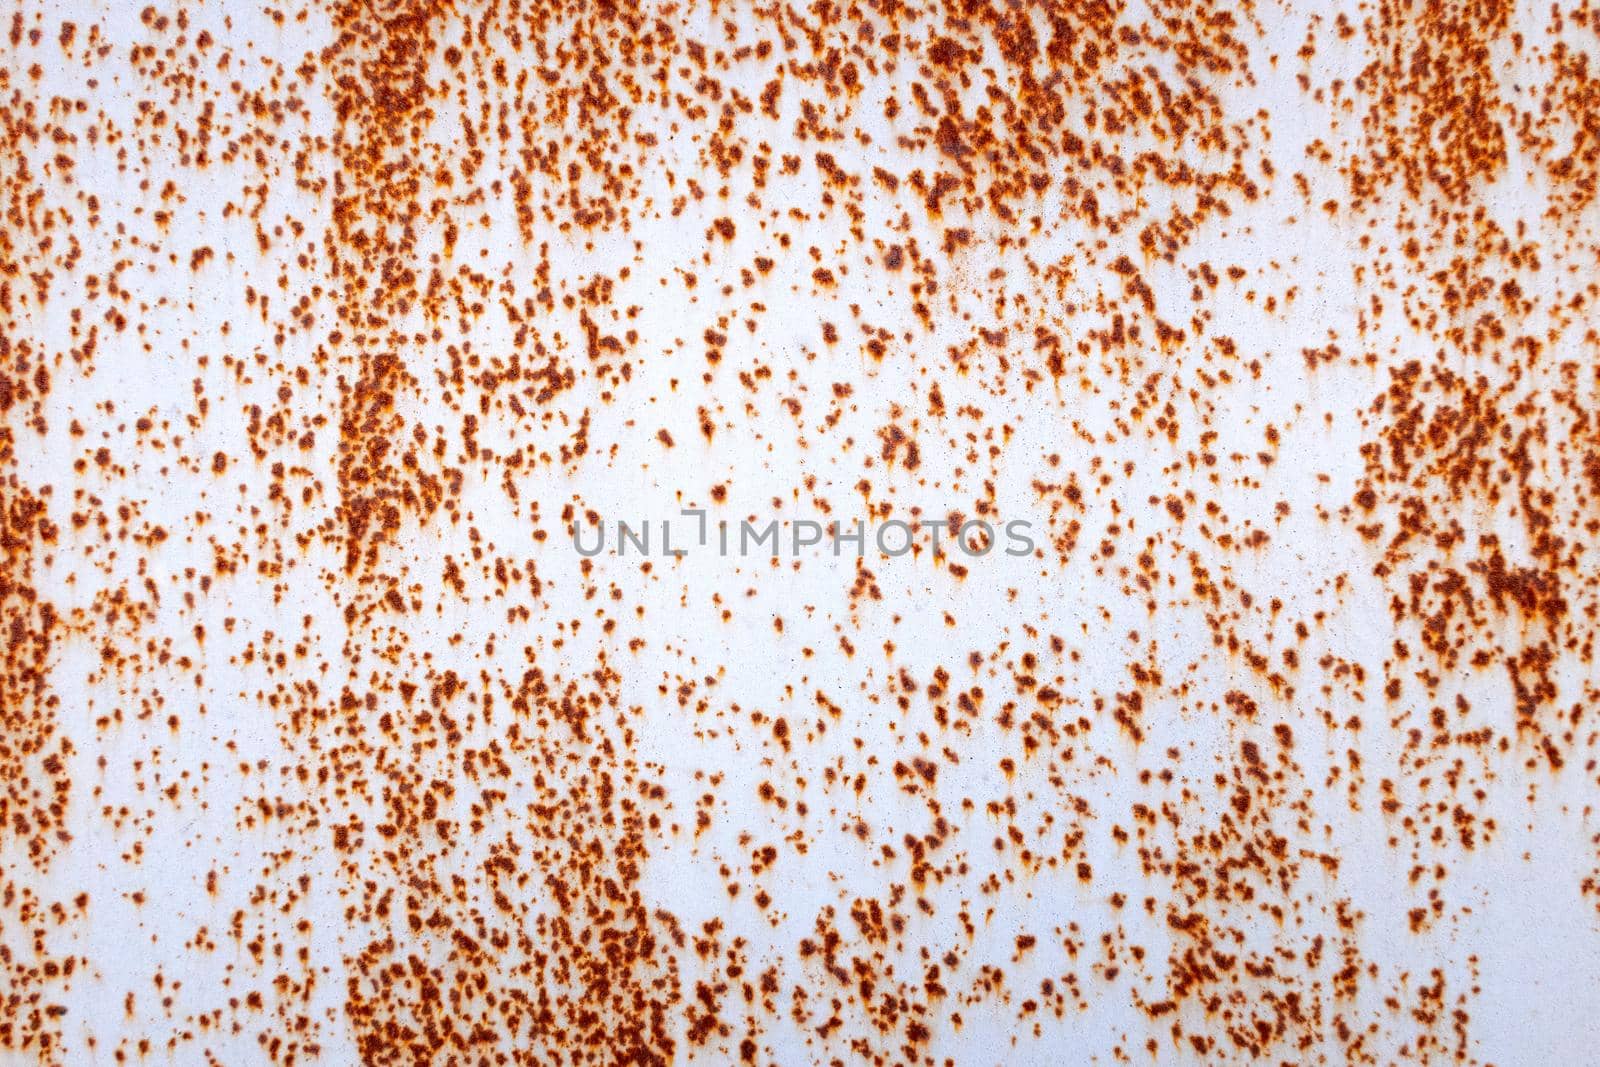 Rusty iron and the remnants of gray paint.Horizontal background.